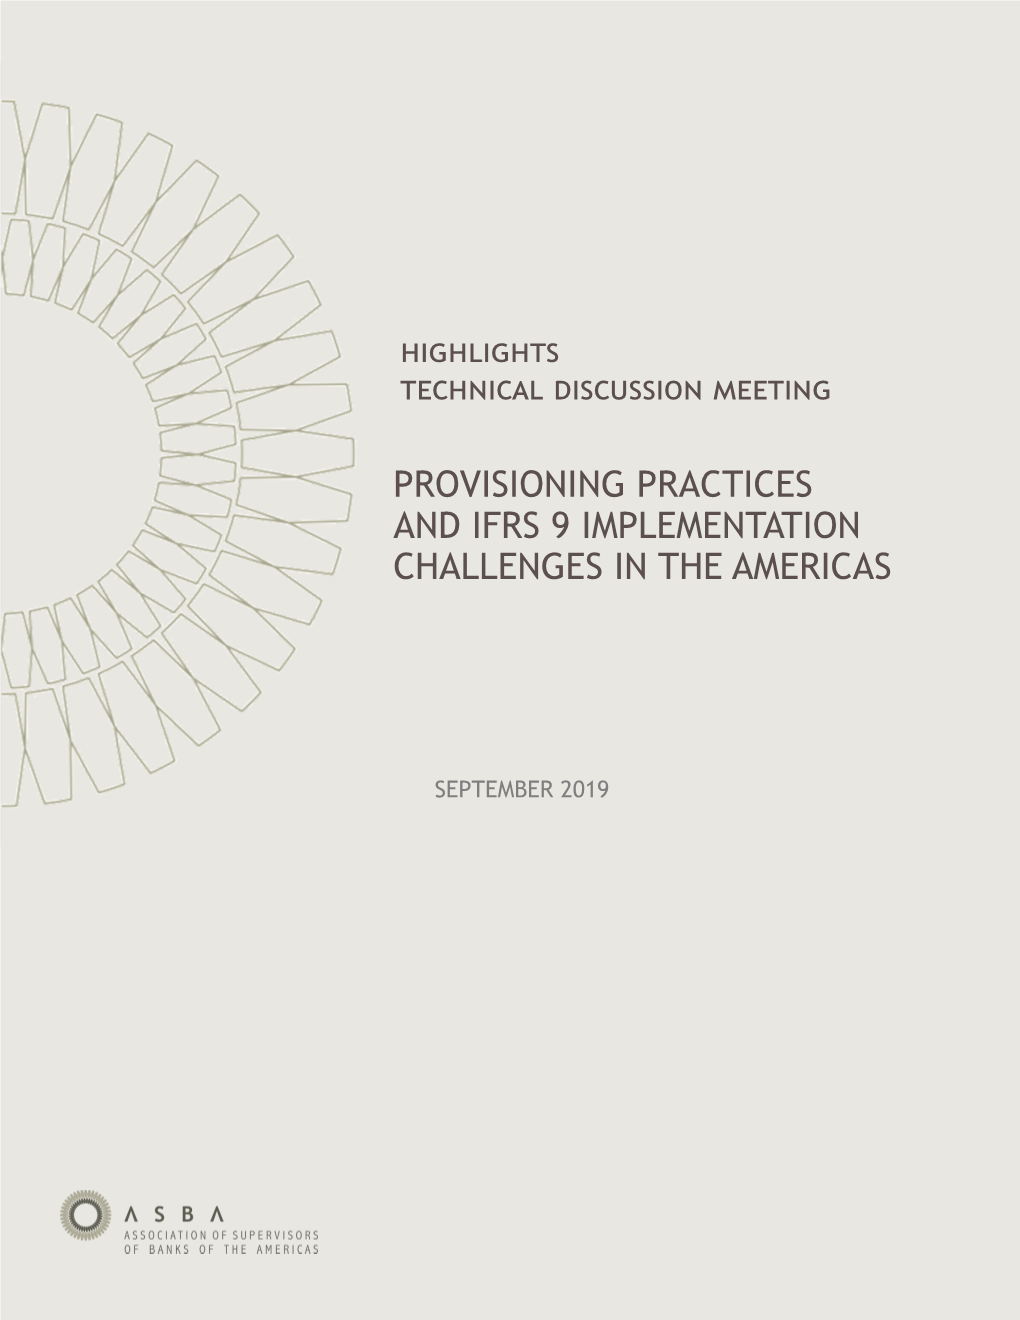 Provisioning Practices and Ifrs 9 Implementation Challenges in the Americas